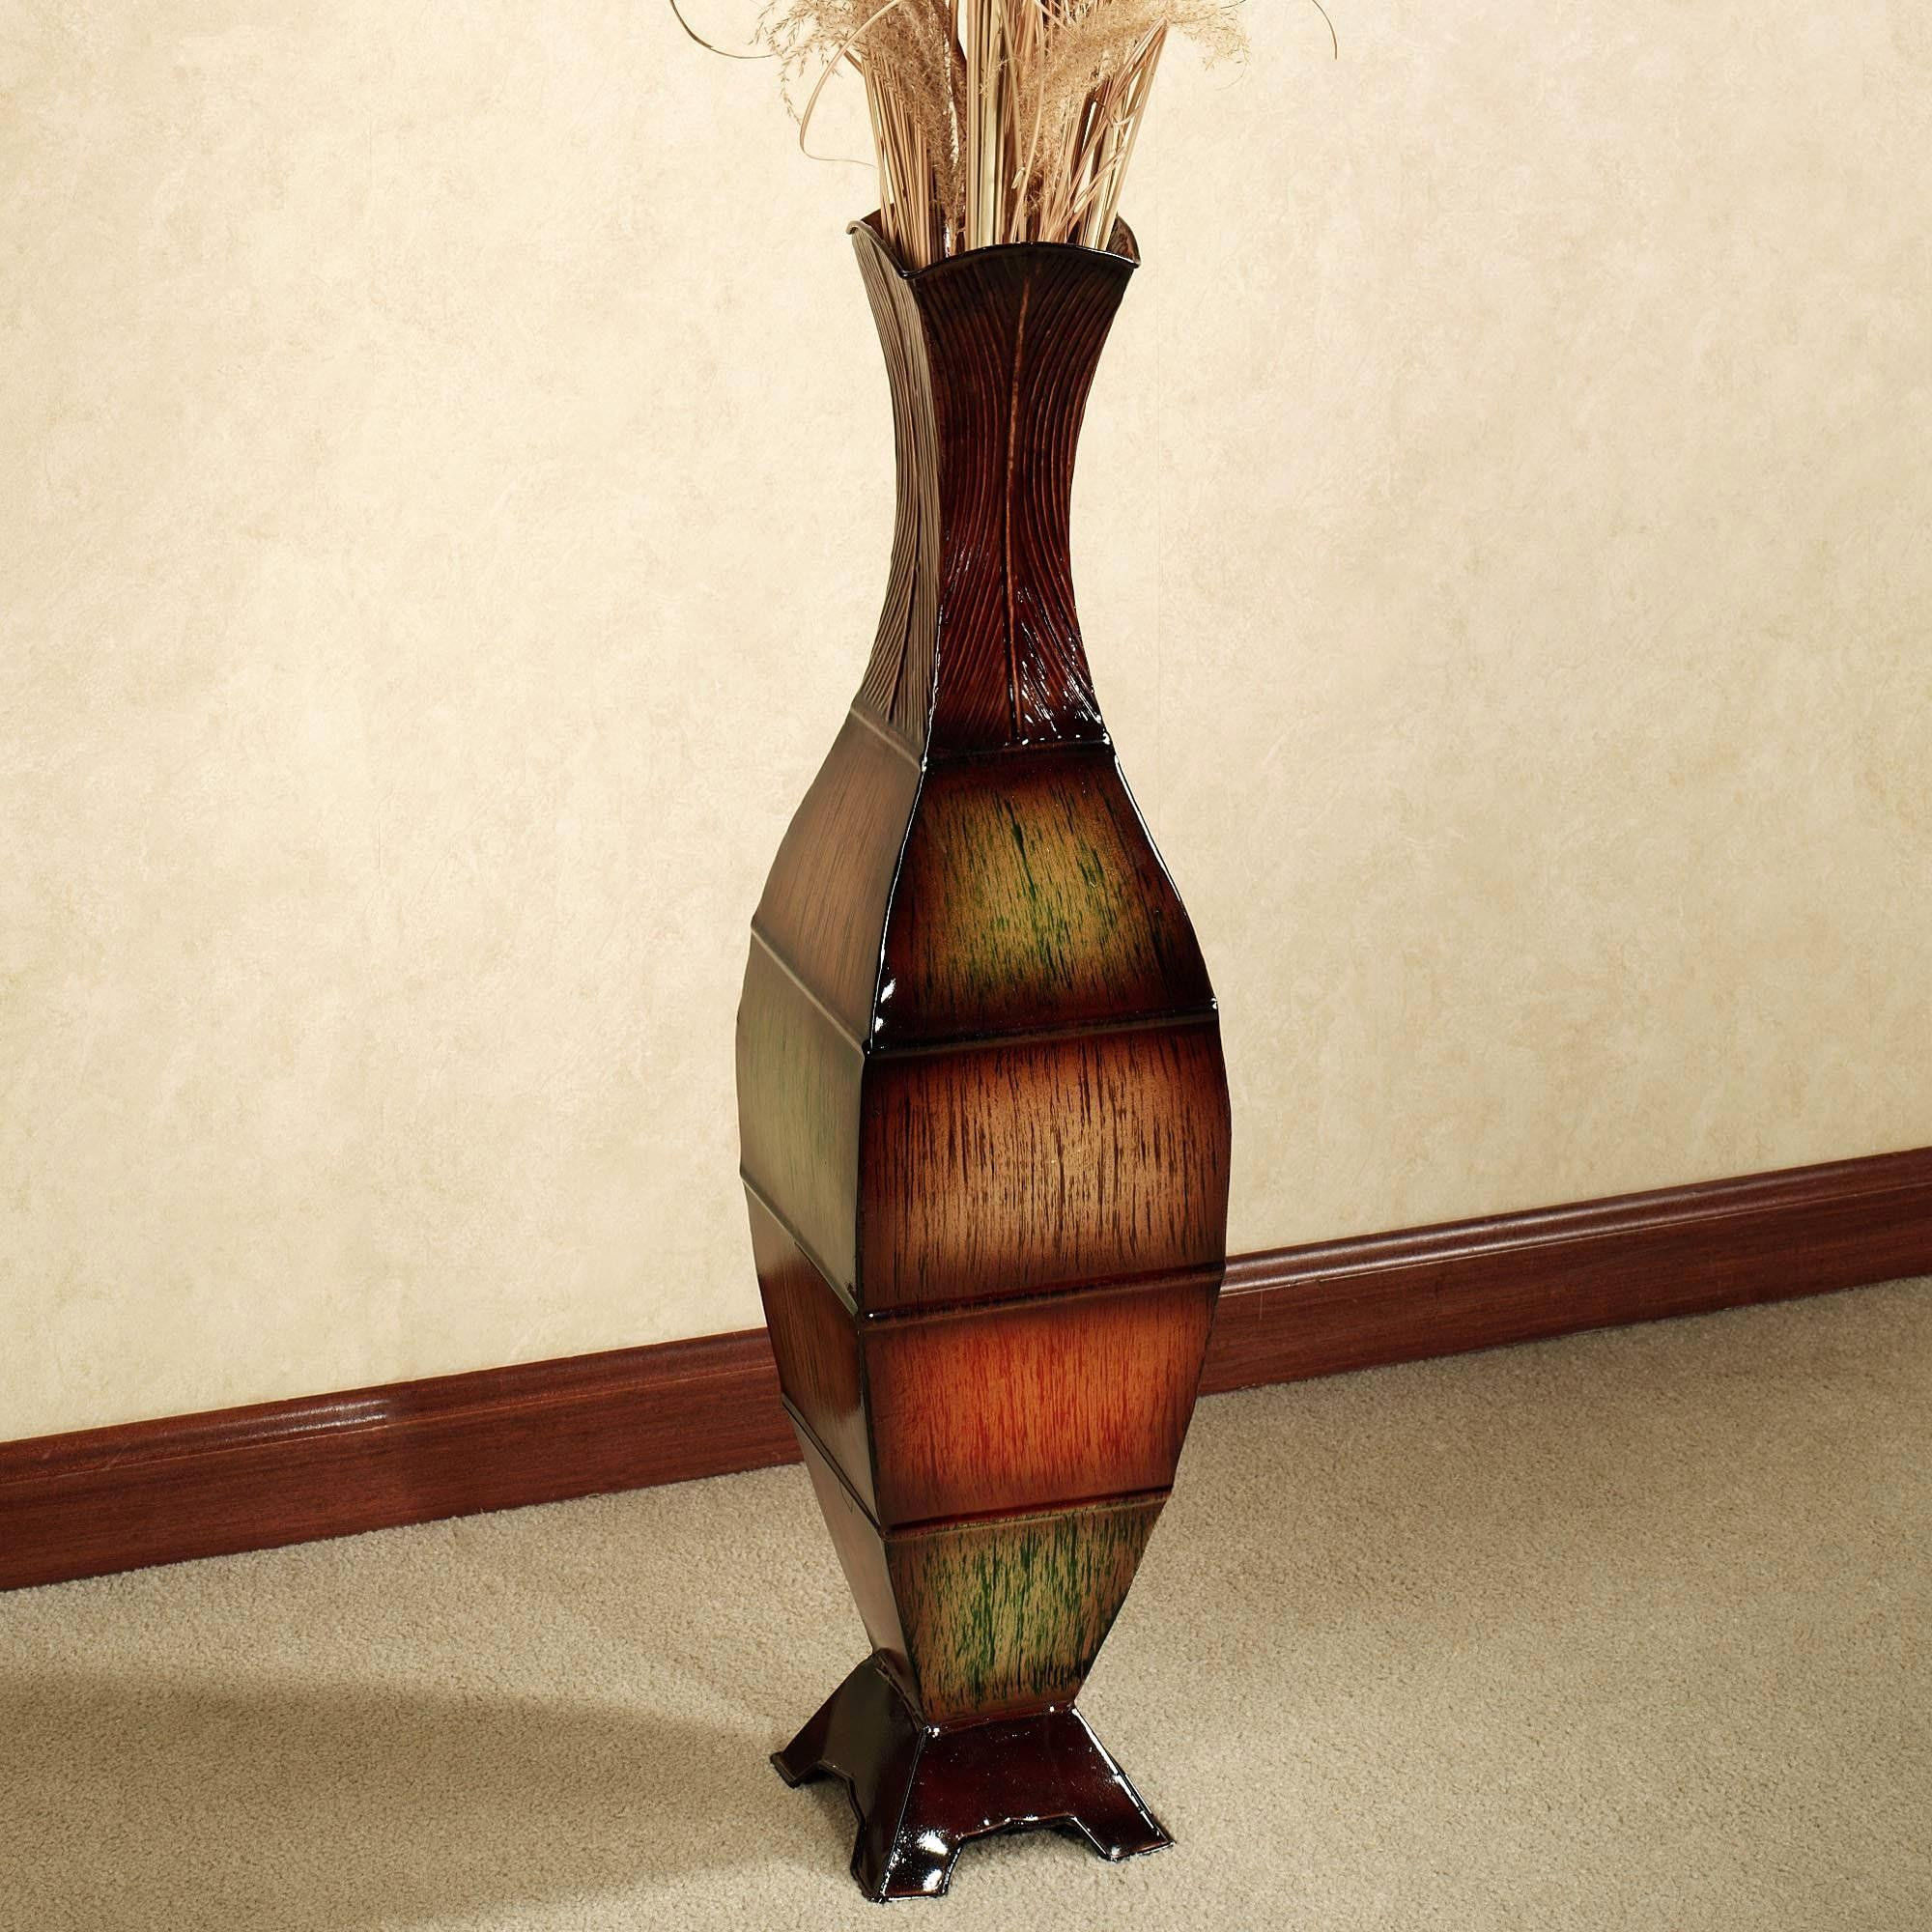 24 Trendy Wedding Centerpiece Vases In Bulk 2024 free download wedding centerpiece vases in bulk of living room vases wholesale new h vases big tall i 0d for cheap also pertaining to living room vases wholesale new h vases big tall i 0d for cheap also d